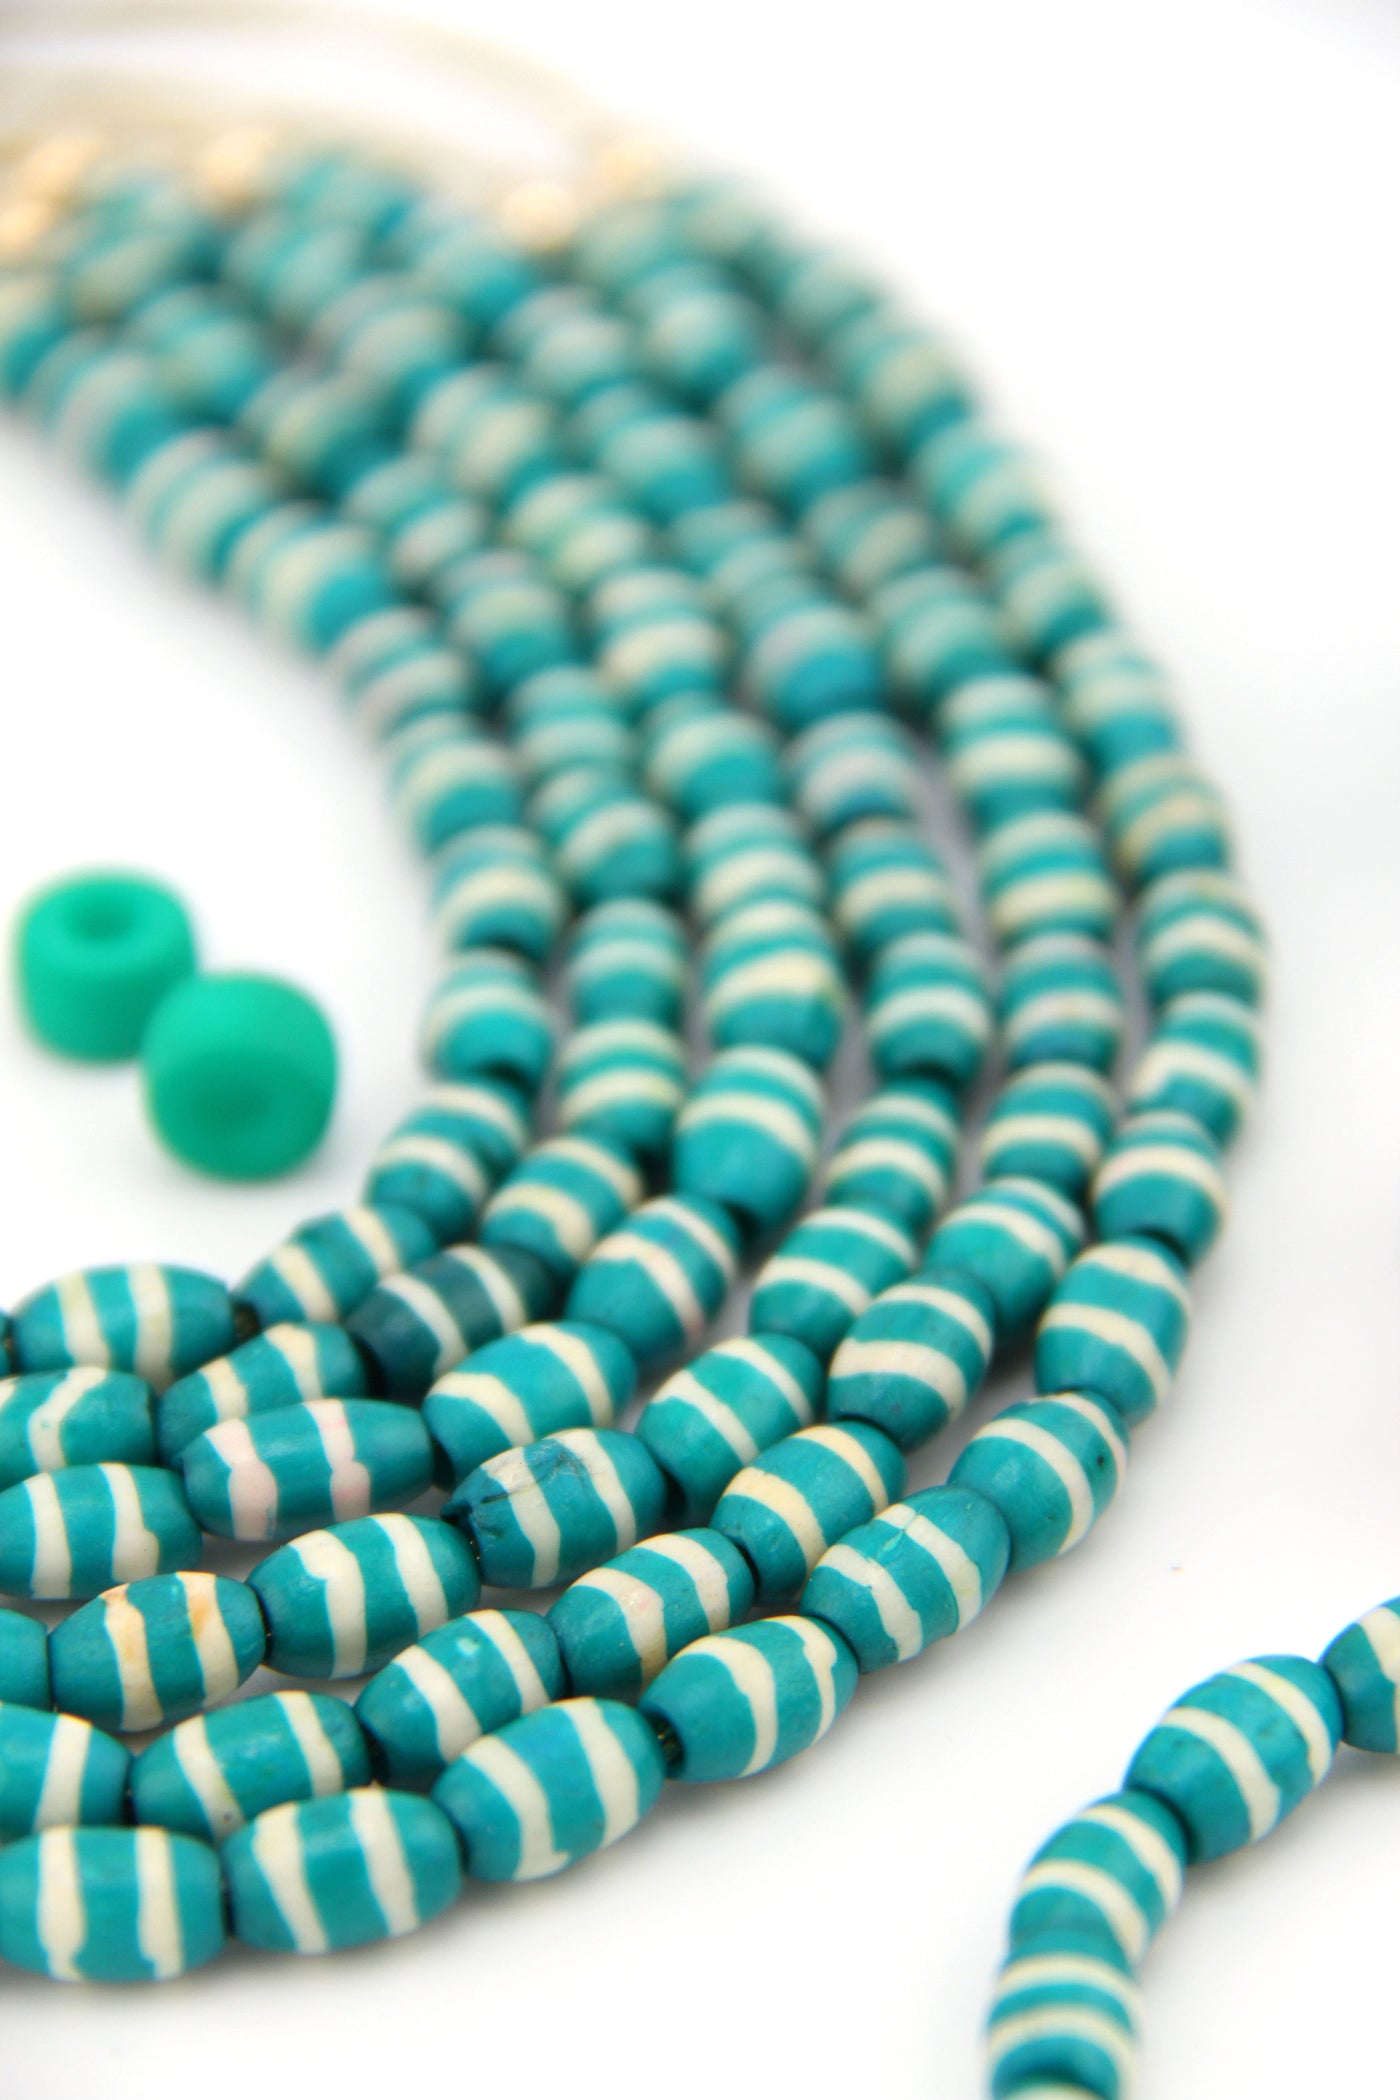 Teal & Cream Stripes: Oval Bone Beads, 6x10mm, 20 Pieces